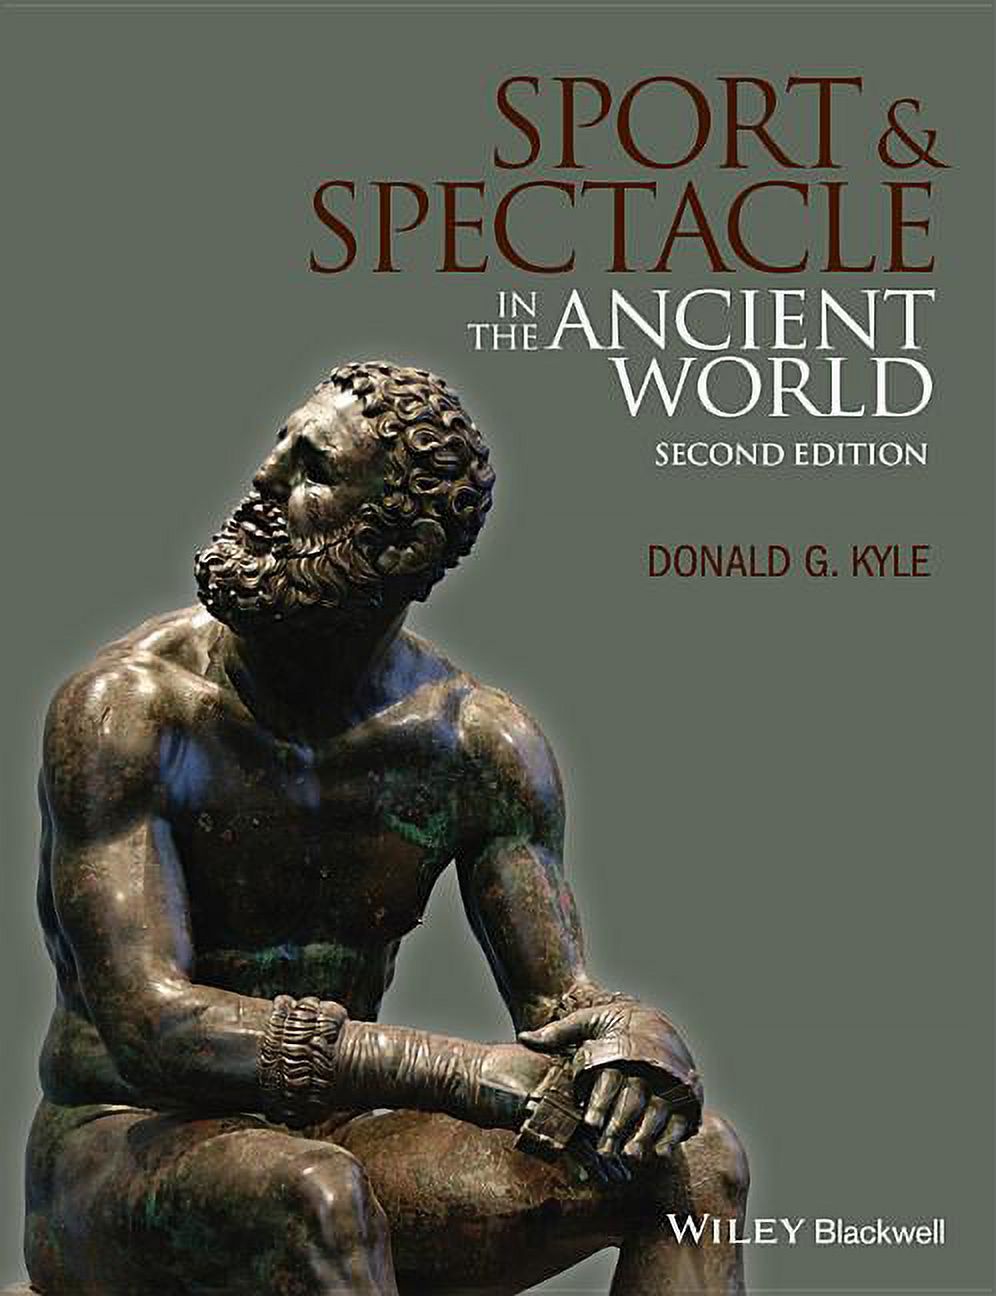 Ancient Cultures: Sport and Spectacle in the Ancient World (Paperback) - image 1 of 1